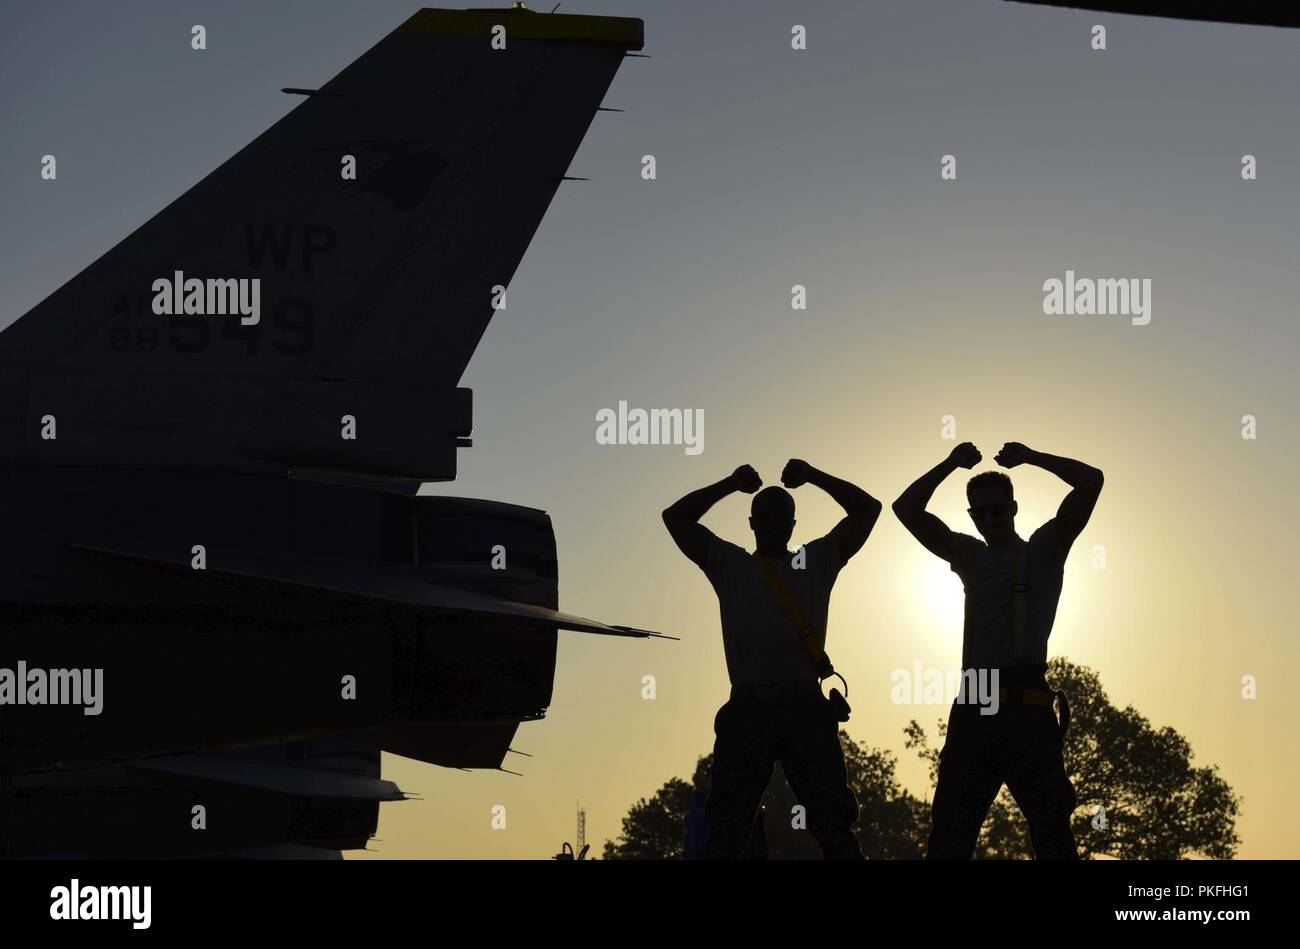 U.S. Air Force Senior Airman Robert Brooks (left), and Senior Airman Nathaniel Lott (right), 80th Aircraft Maintenance Unit crew chiefs, stand next to an F-16 Fighting Falcon in their unit’s iconic “Crush ‘Em” stance during Exercise Pitch Black 2018 at Royal Australian Air Force Base Darwin, Australia, Aug. 9, 2018. This exercise allows U.S. Pacific Air Forces Airmen and the Royal Australian Air Force to train together and increase interoperability with air and ground forces from within the Indo-Pacific region. Stock Photo